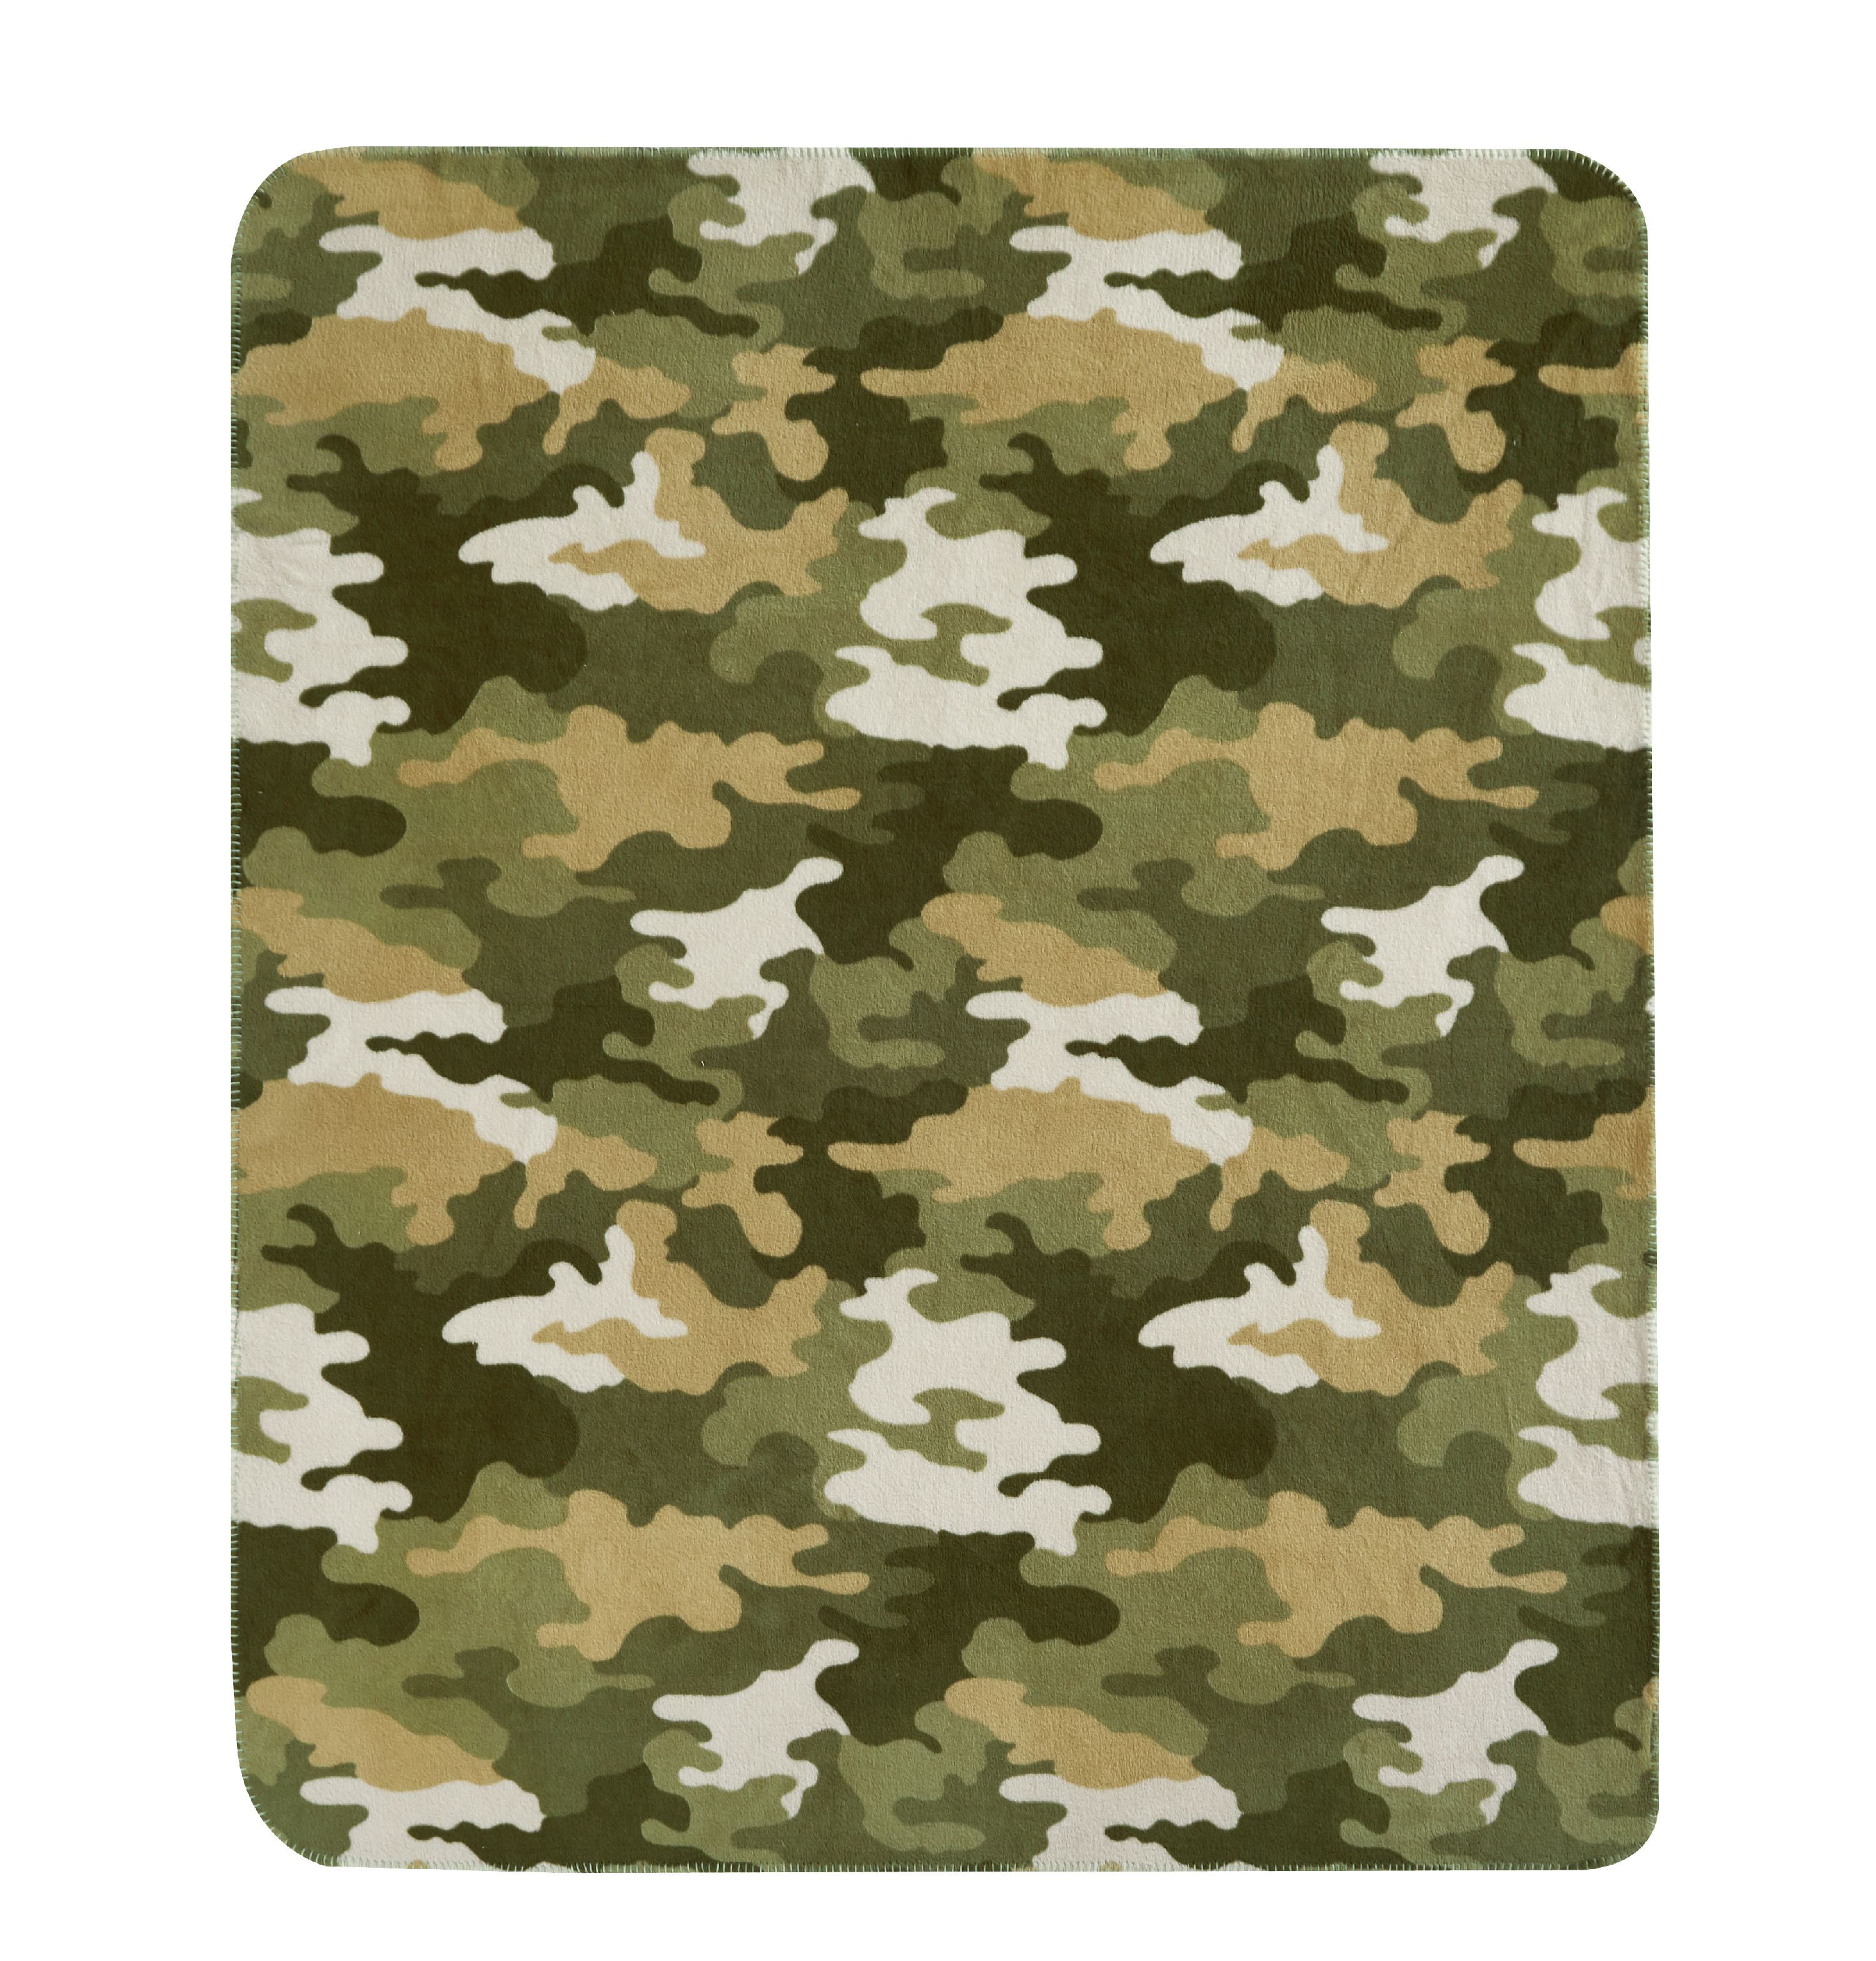 NEW 50 x 60 PRINTED FLEECE Throws LAB FOREST or 3D Seclusion CAMO Camouflauge 